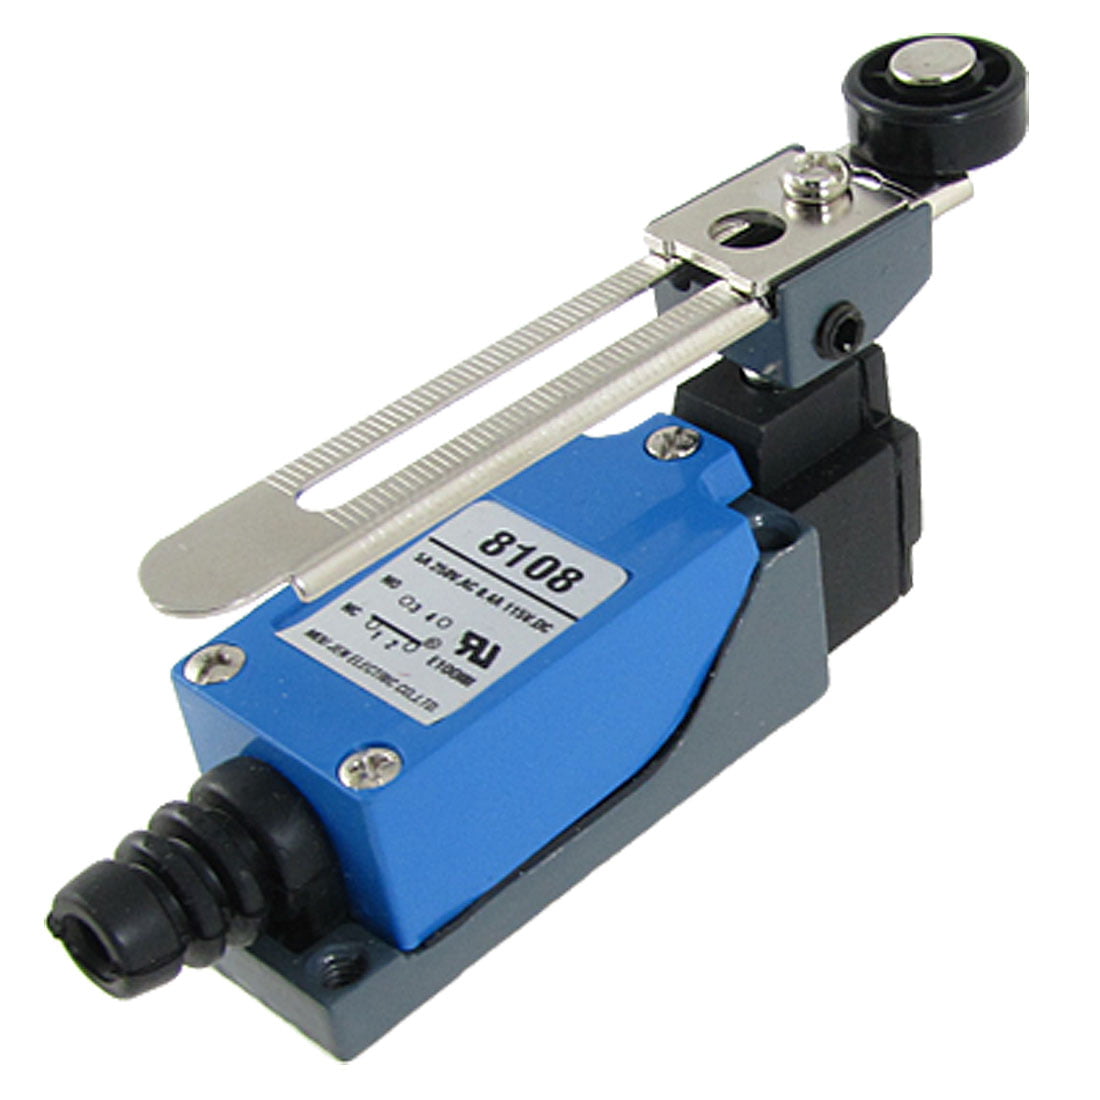 Rotary adjustable lever arm limit switch for plasma CNC mill blue 